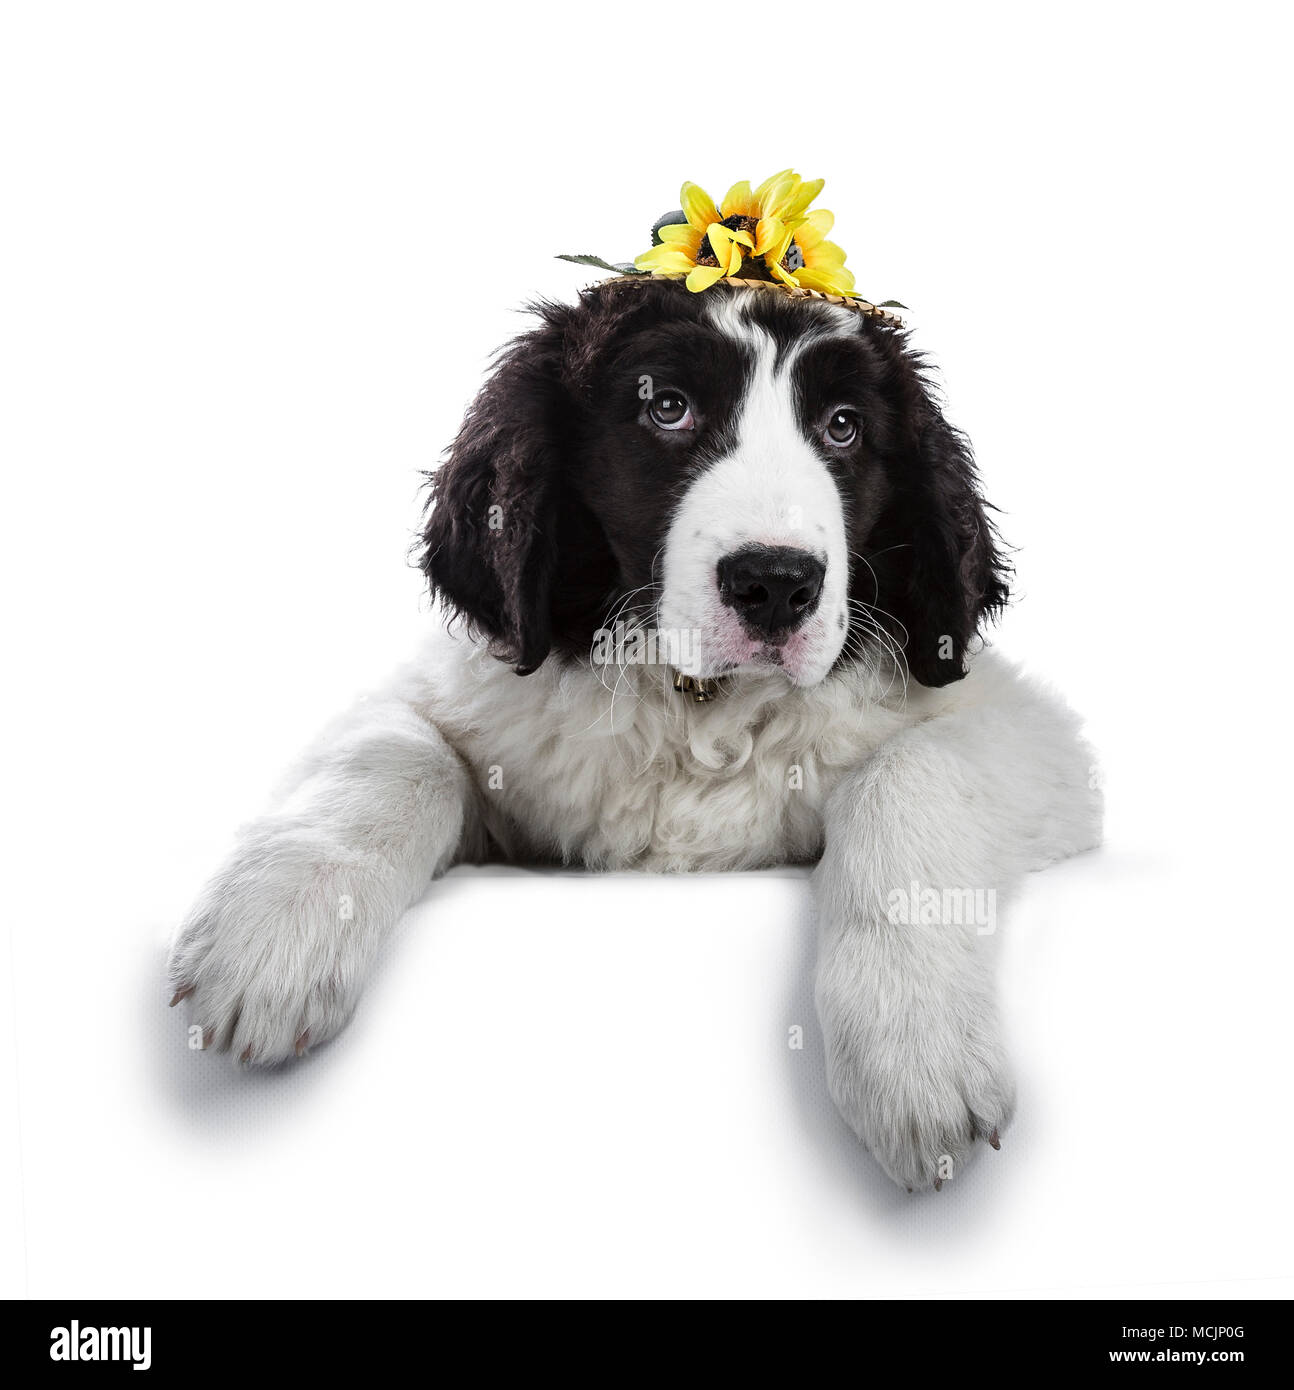 Black and white Landseer puppy dog laying down and wearing straw hat with fake sunflowers while looking in the camera isolated on white background Stock Photo